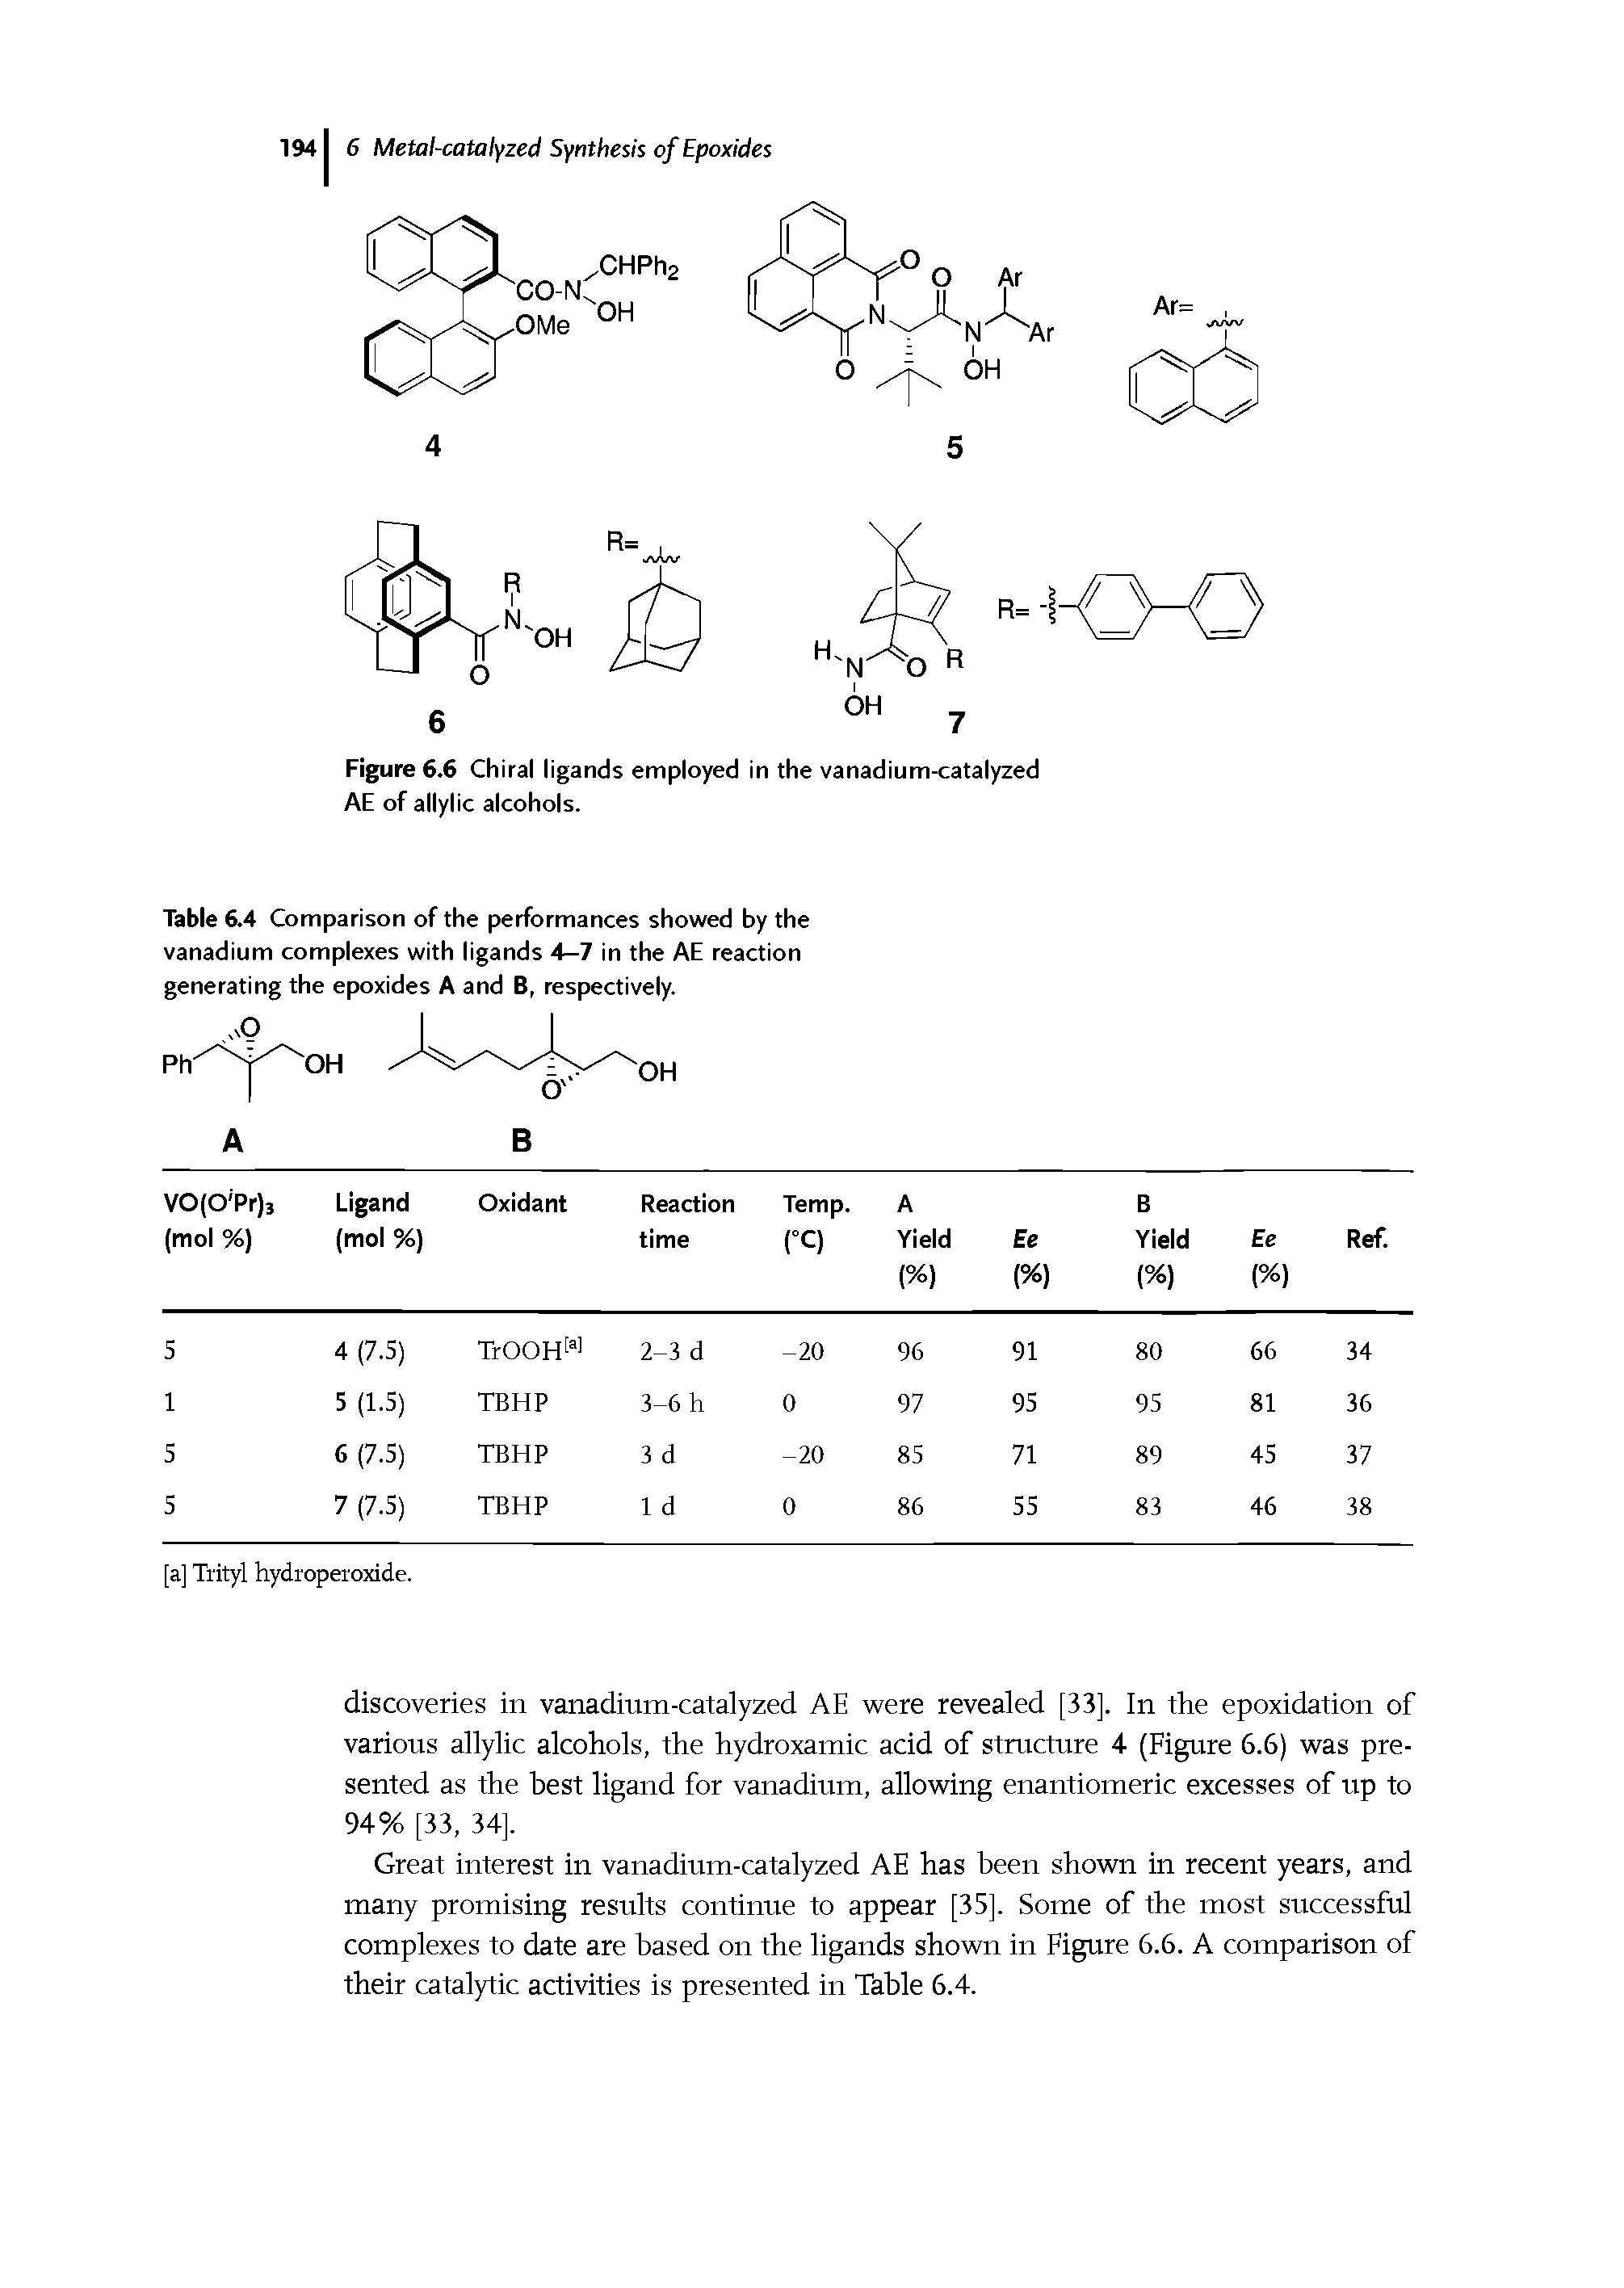 Table 6.4 Comparison of the performances showed by the vanadium complexes with ligands 4—7 in the AE reaction generating the epoxides A and B, respectively.